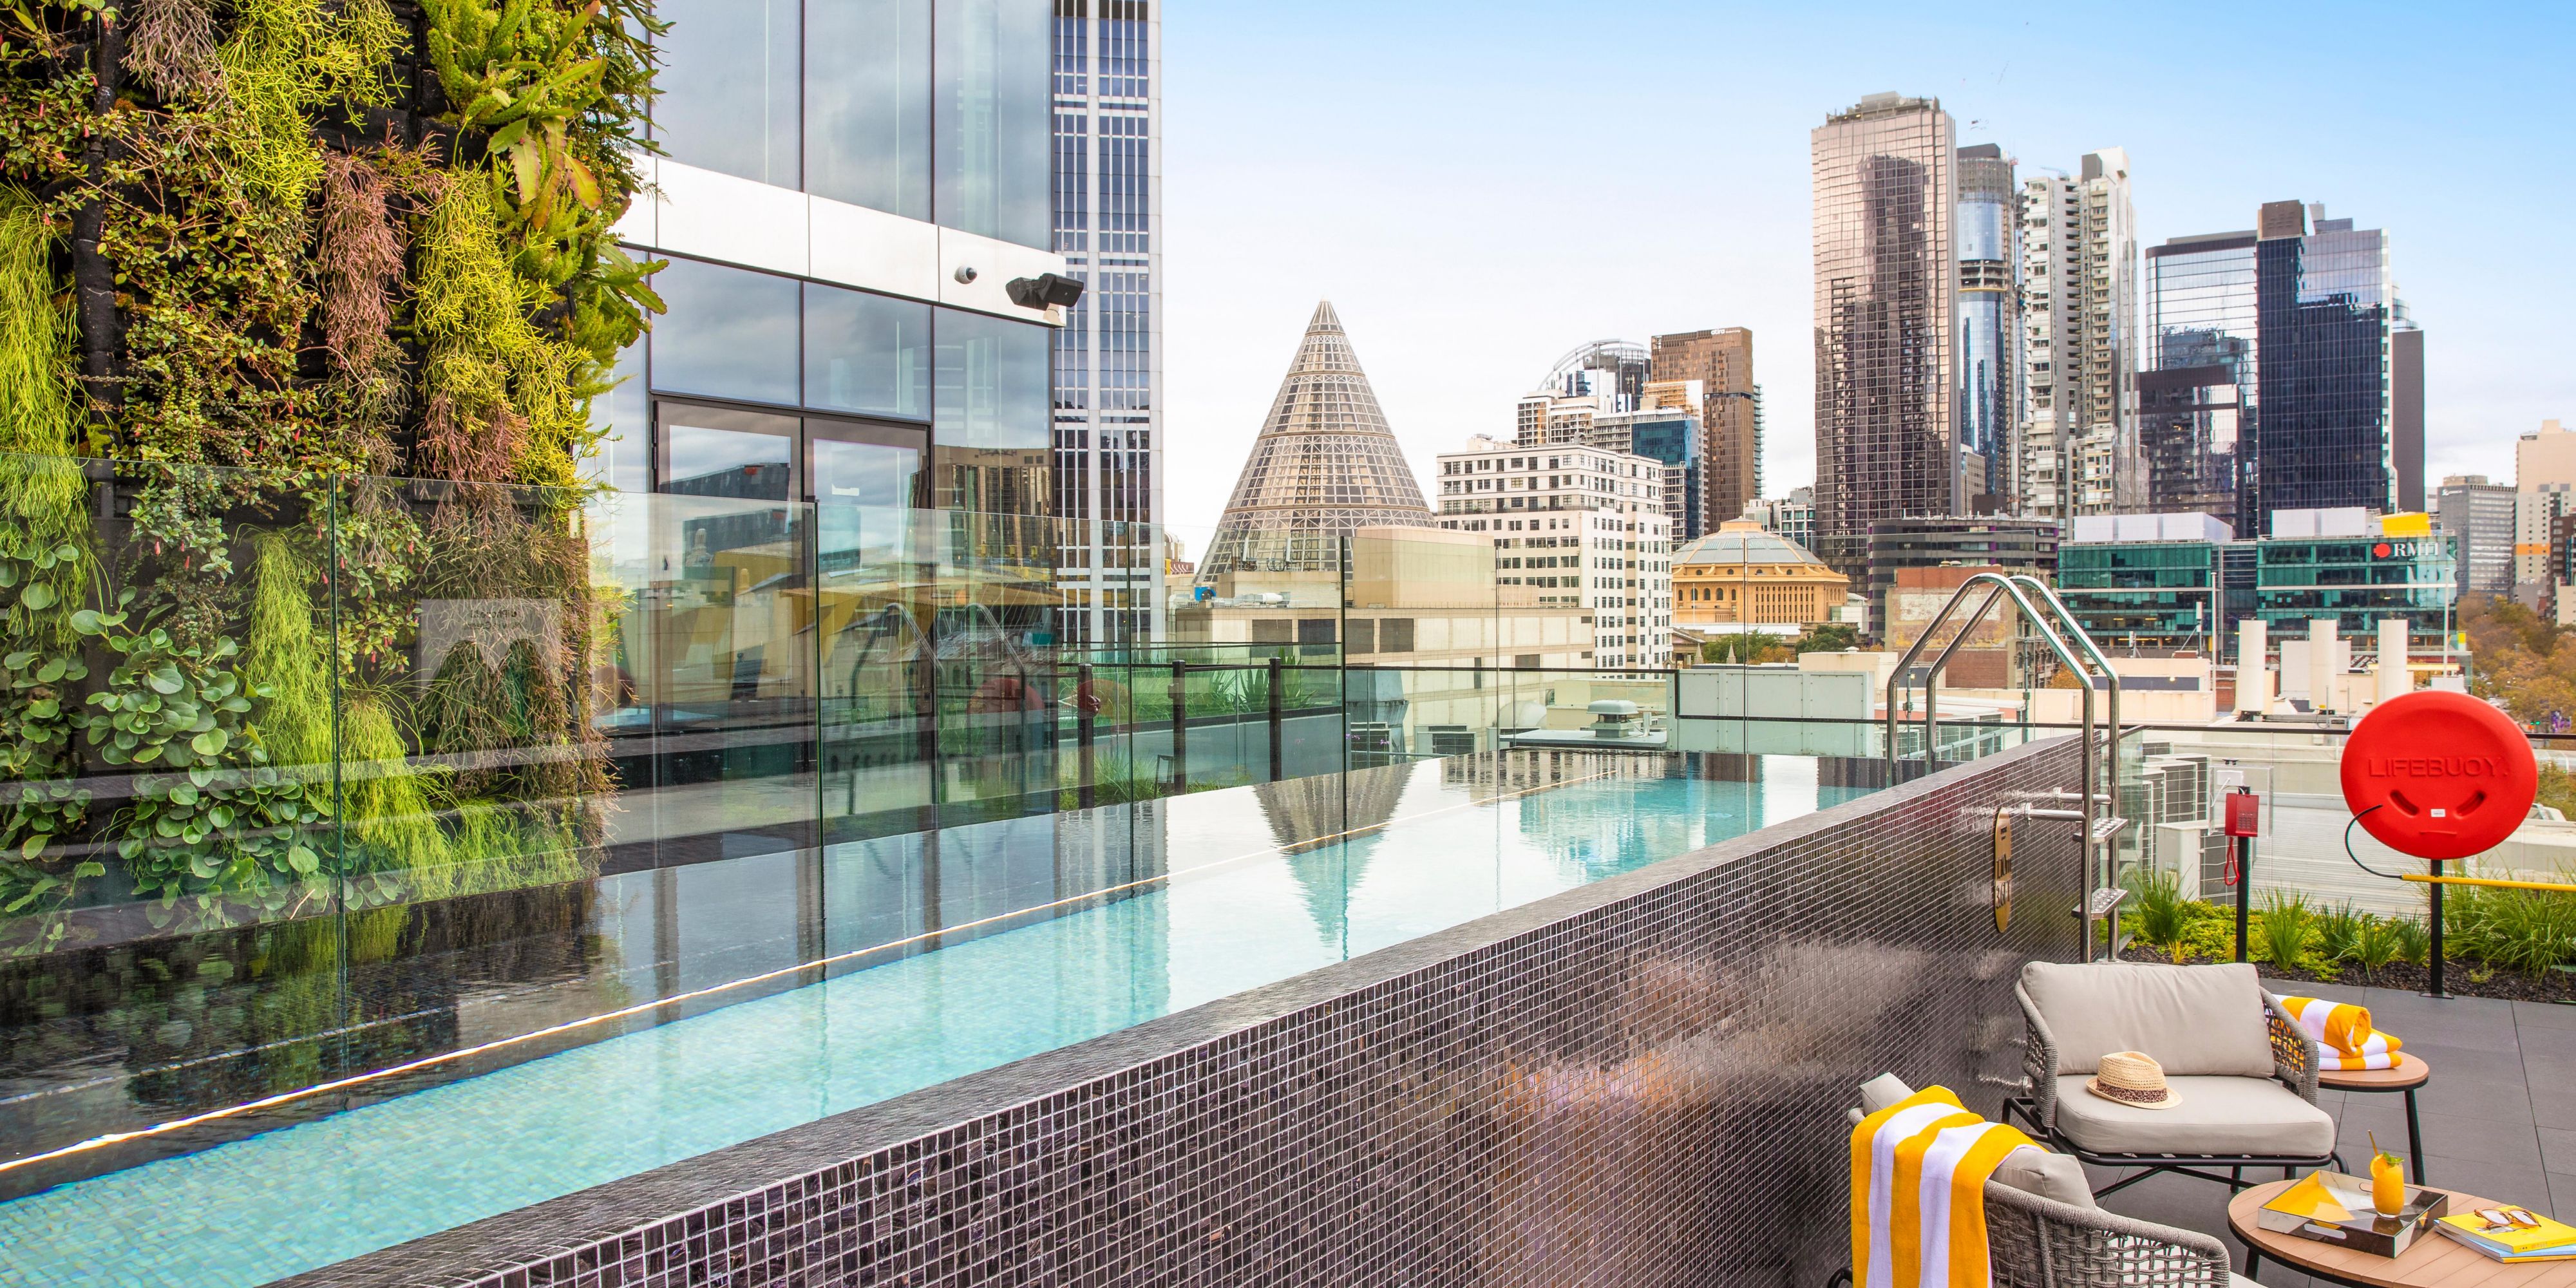 Cast your eyes over impressive views of the CBD while relaxing in our 28 degree heated pool.